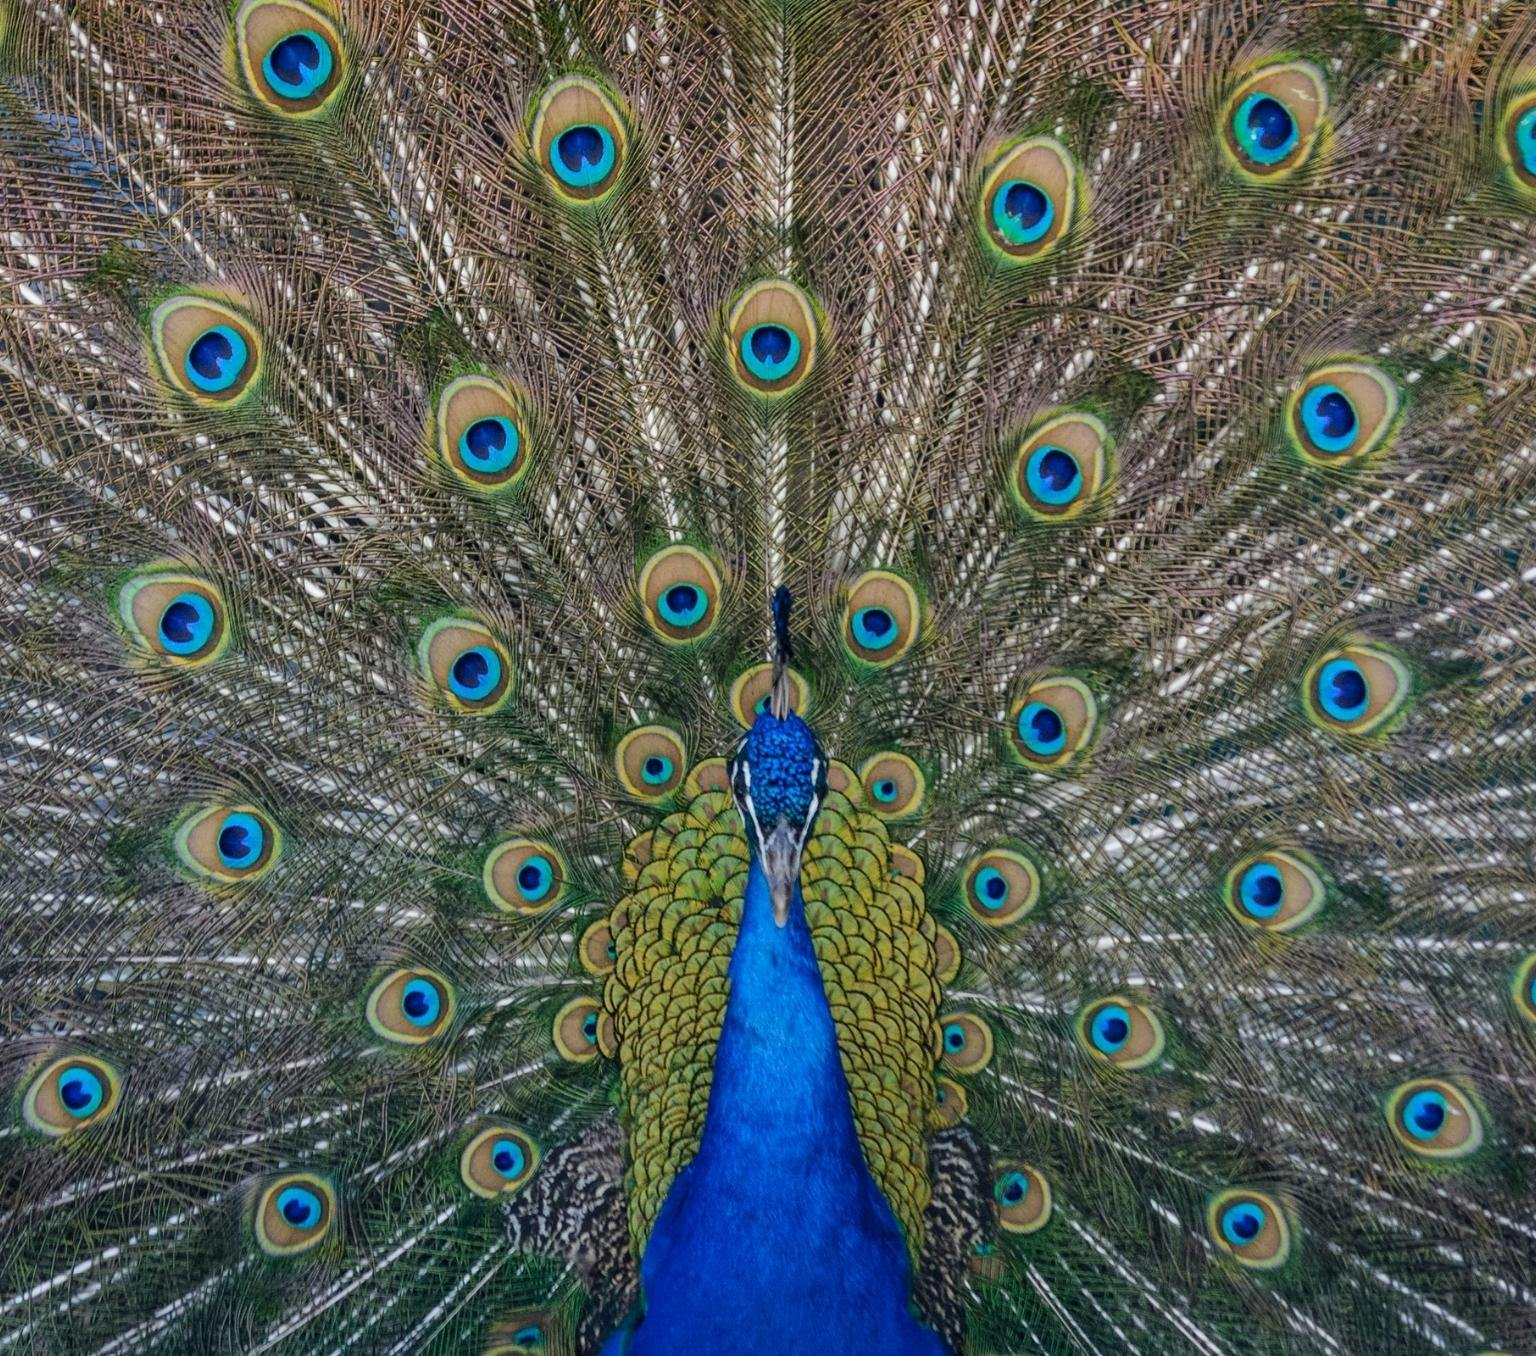 A vibrant blue peacock showcasing its remarkable tail, also known as a train, which gives off the illusion of having lots of large penetrating blue eyes.